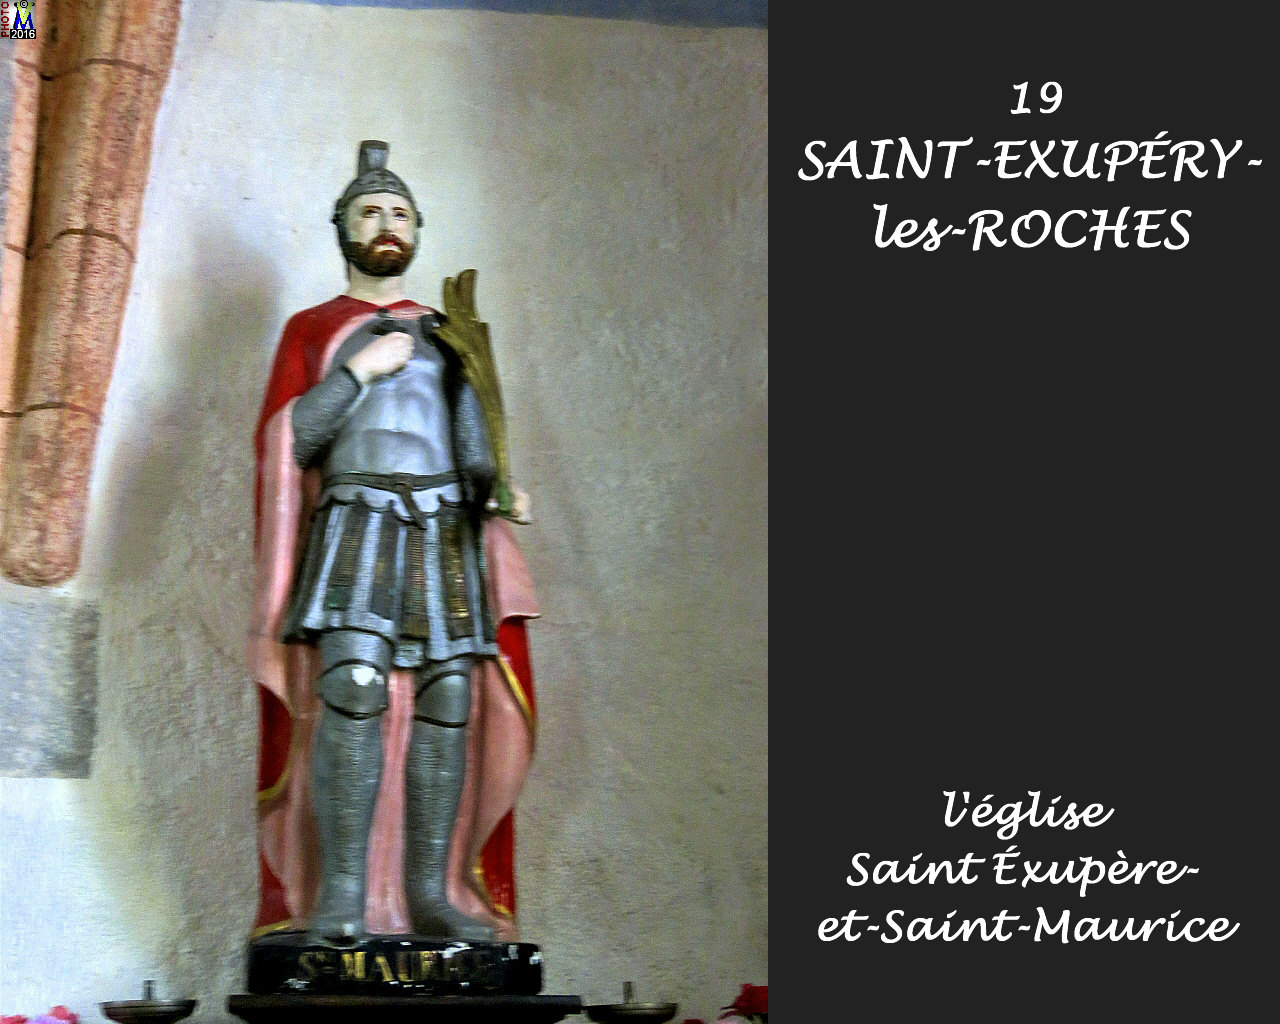 19ST-EXUPERY-ROCHES_eglise_222.jpg